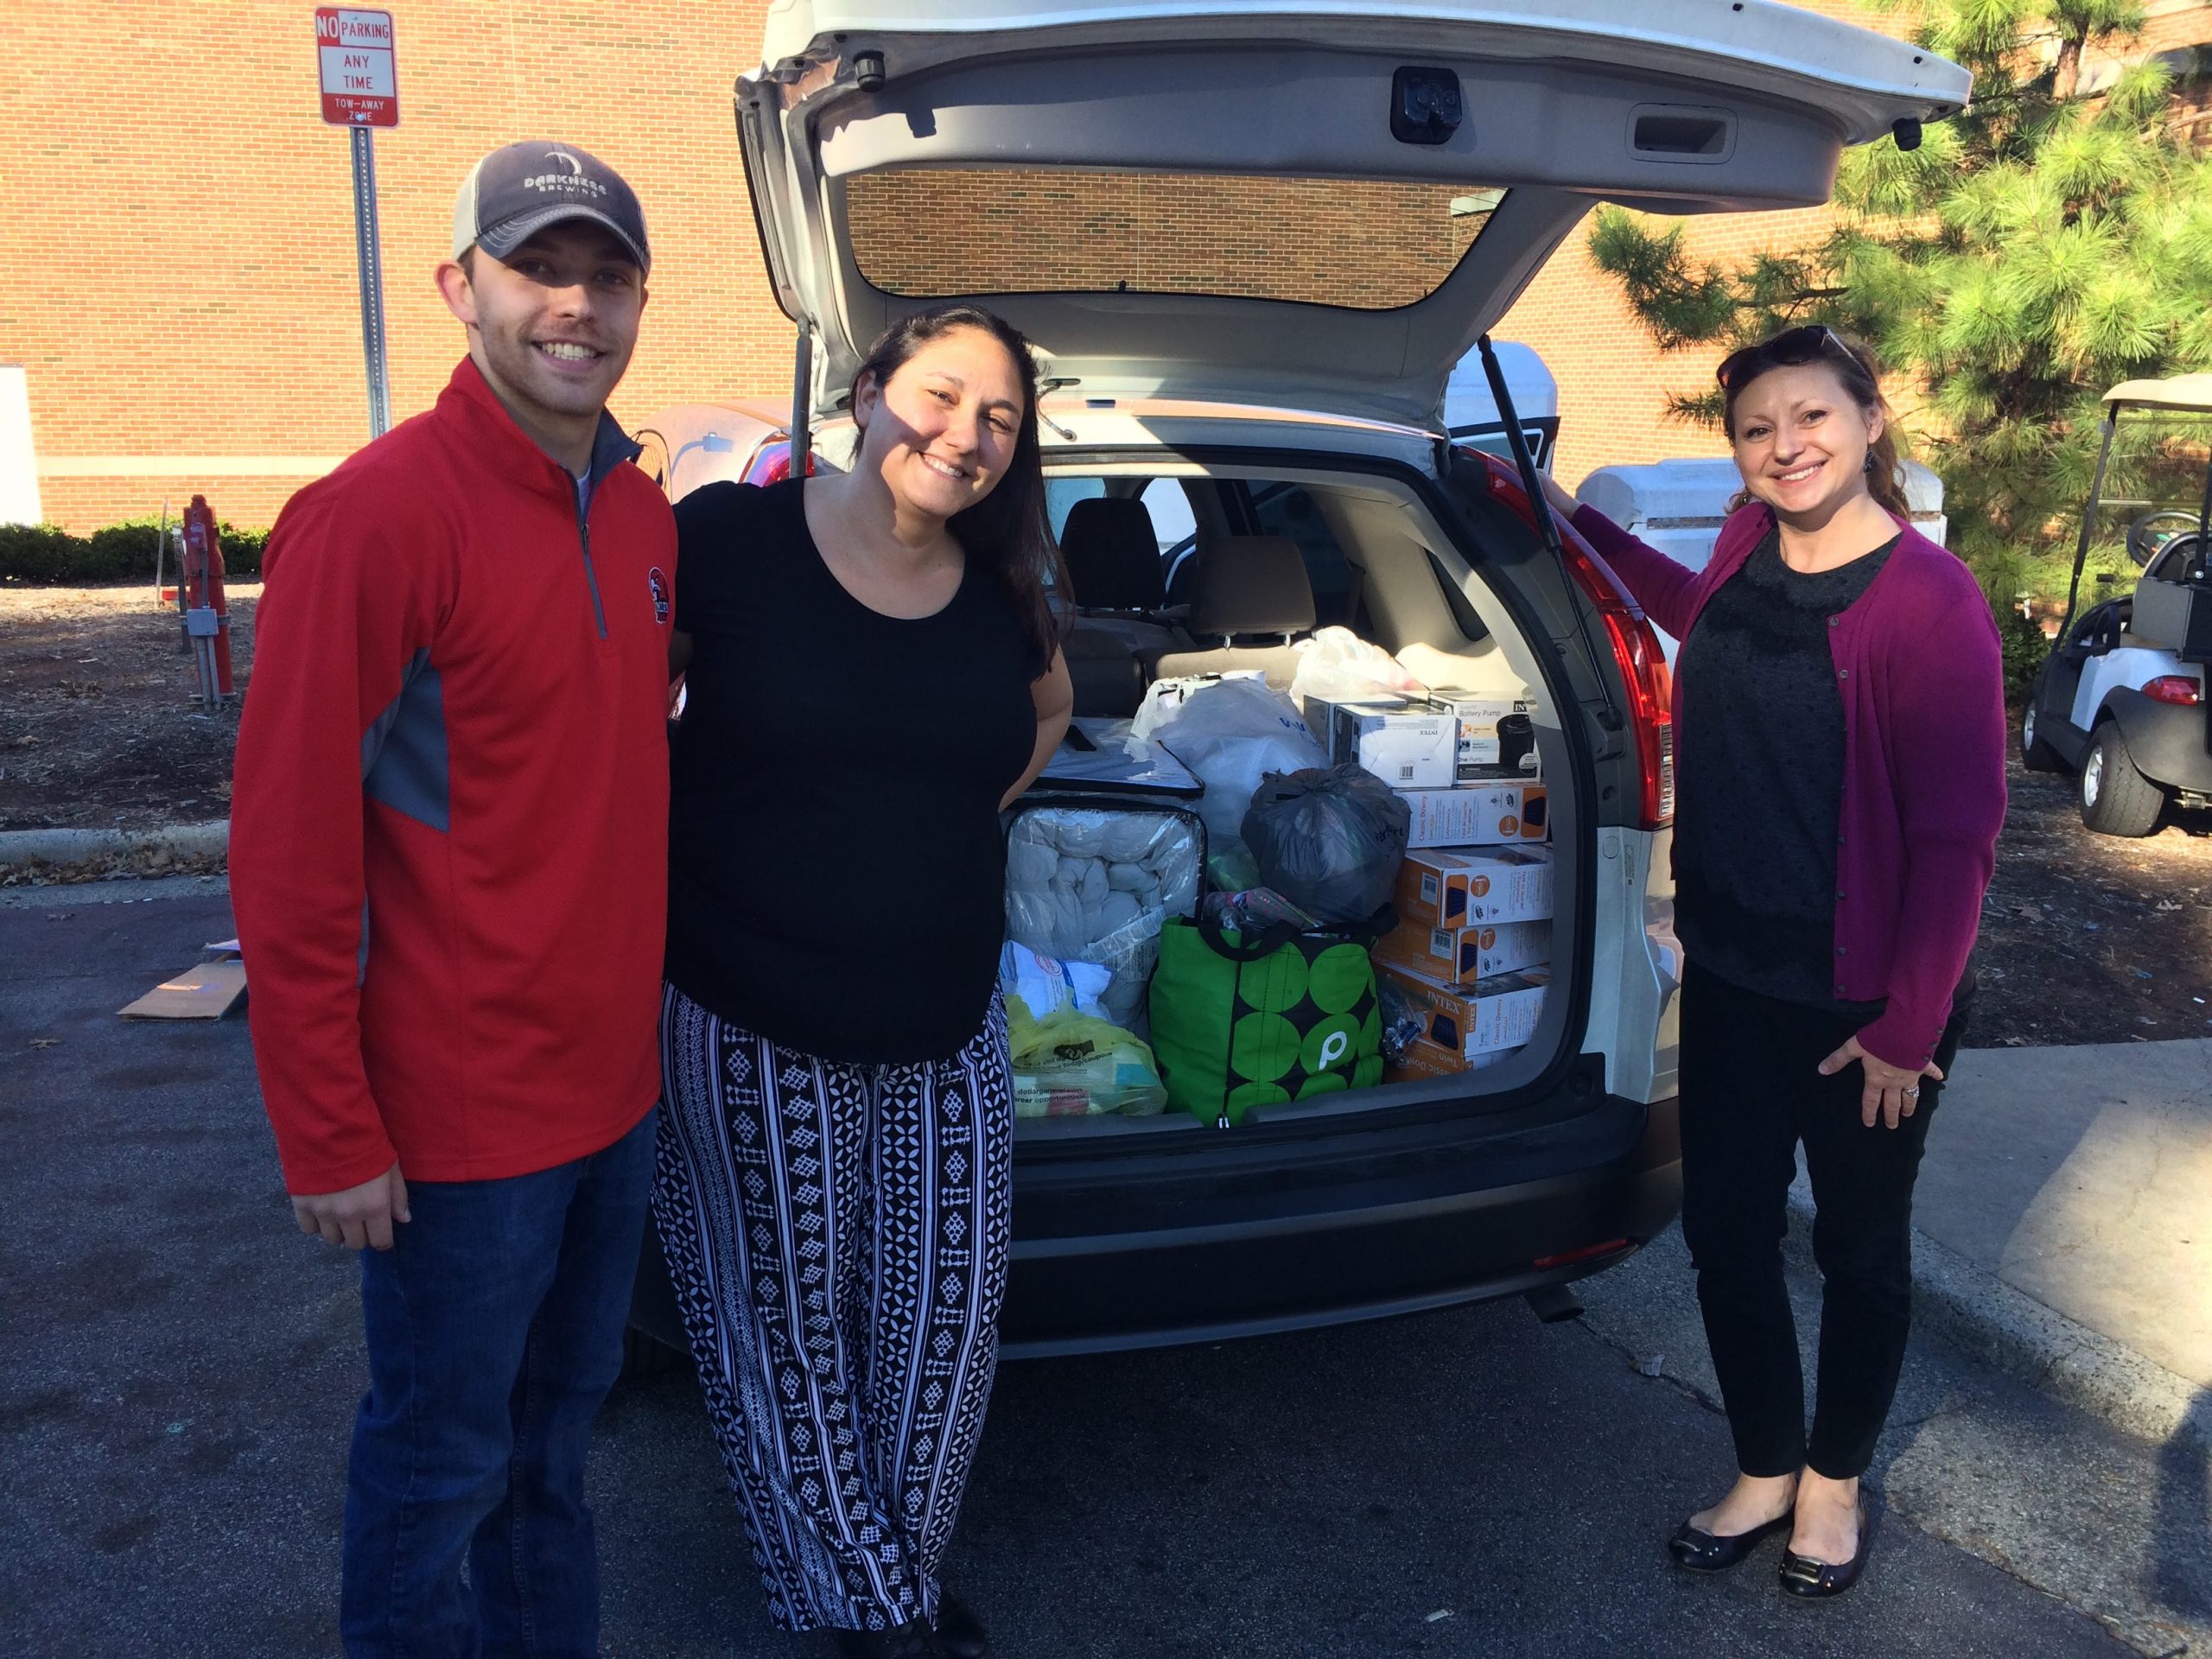 Thank you for a car filled with donations!